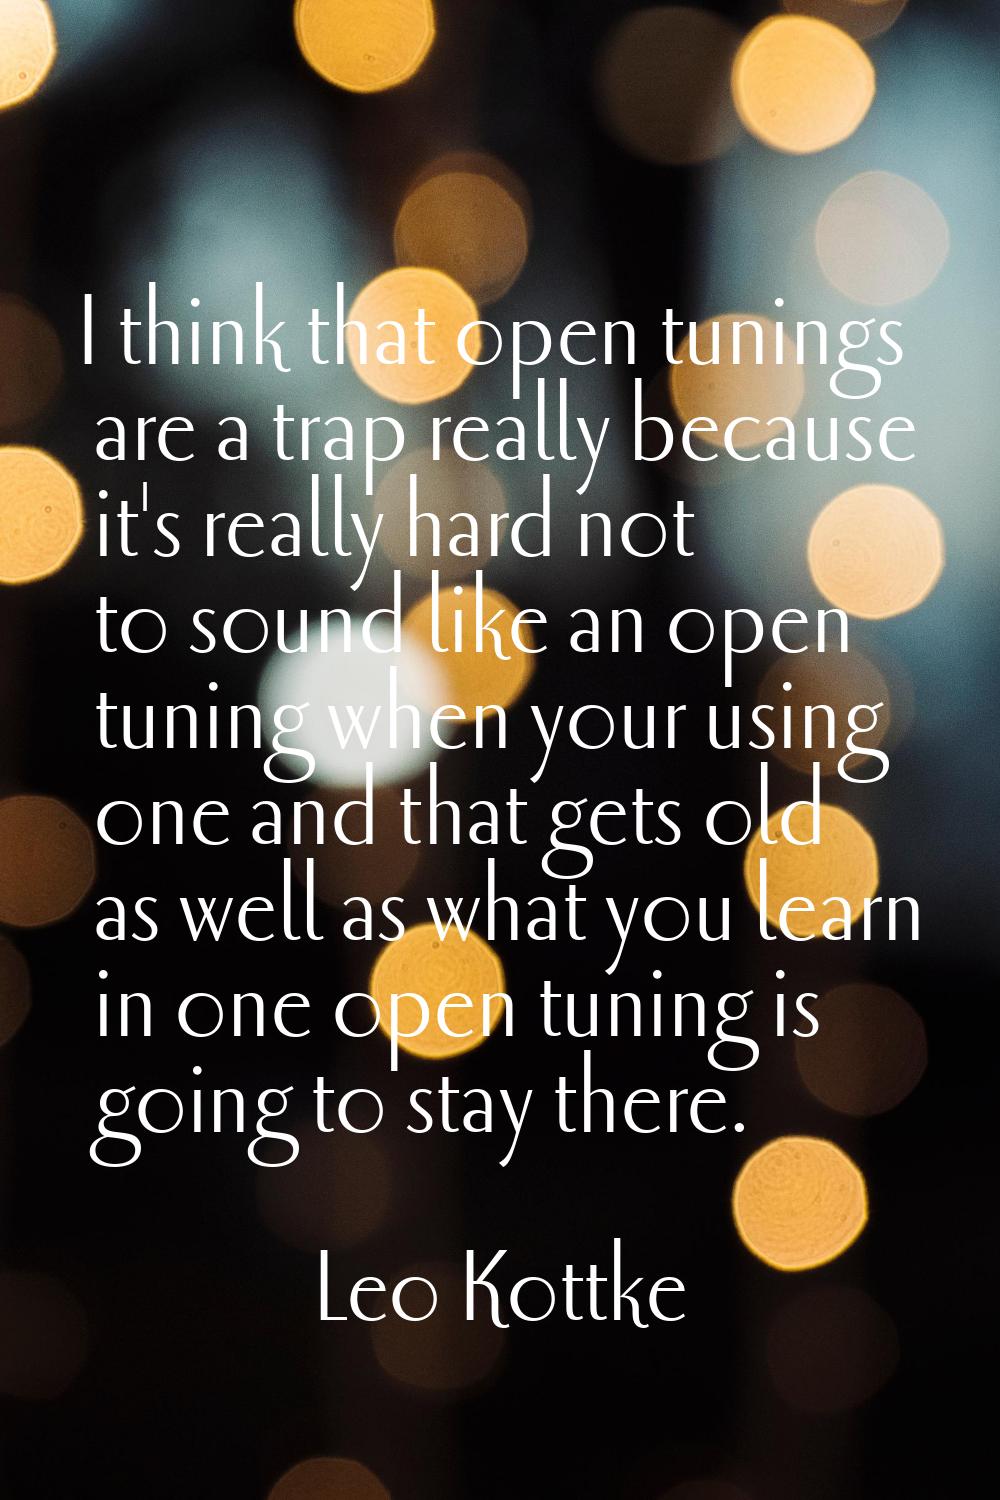 I think that open tunings are a trap really because it's really hard not to sound like an open tuni